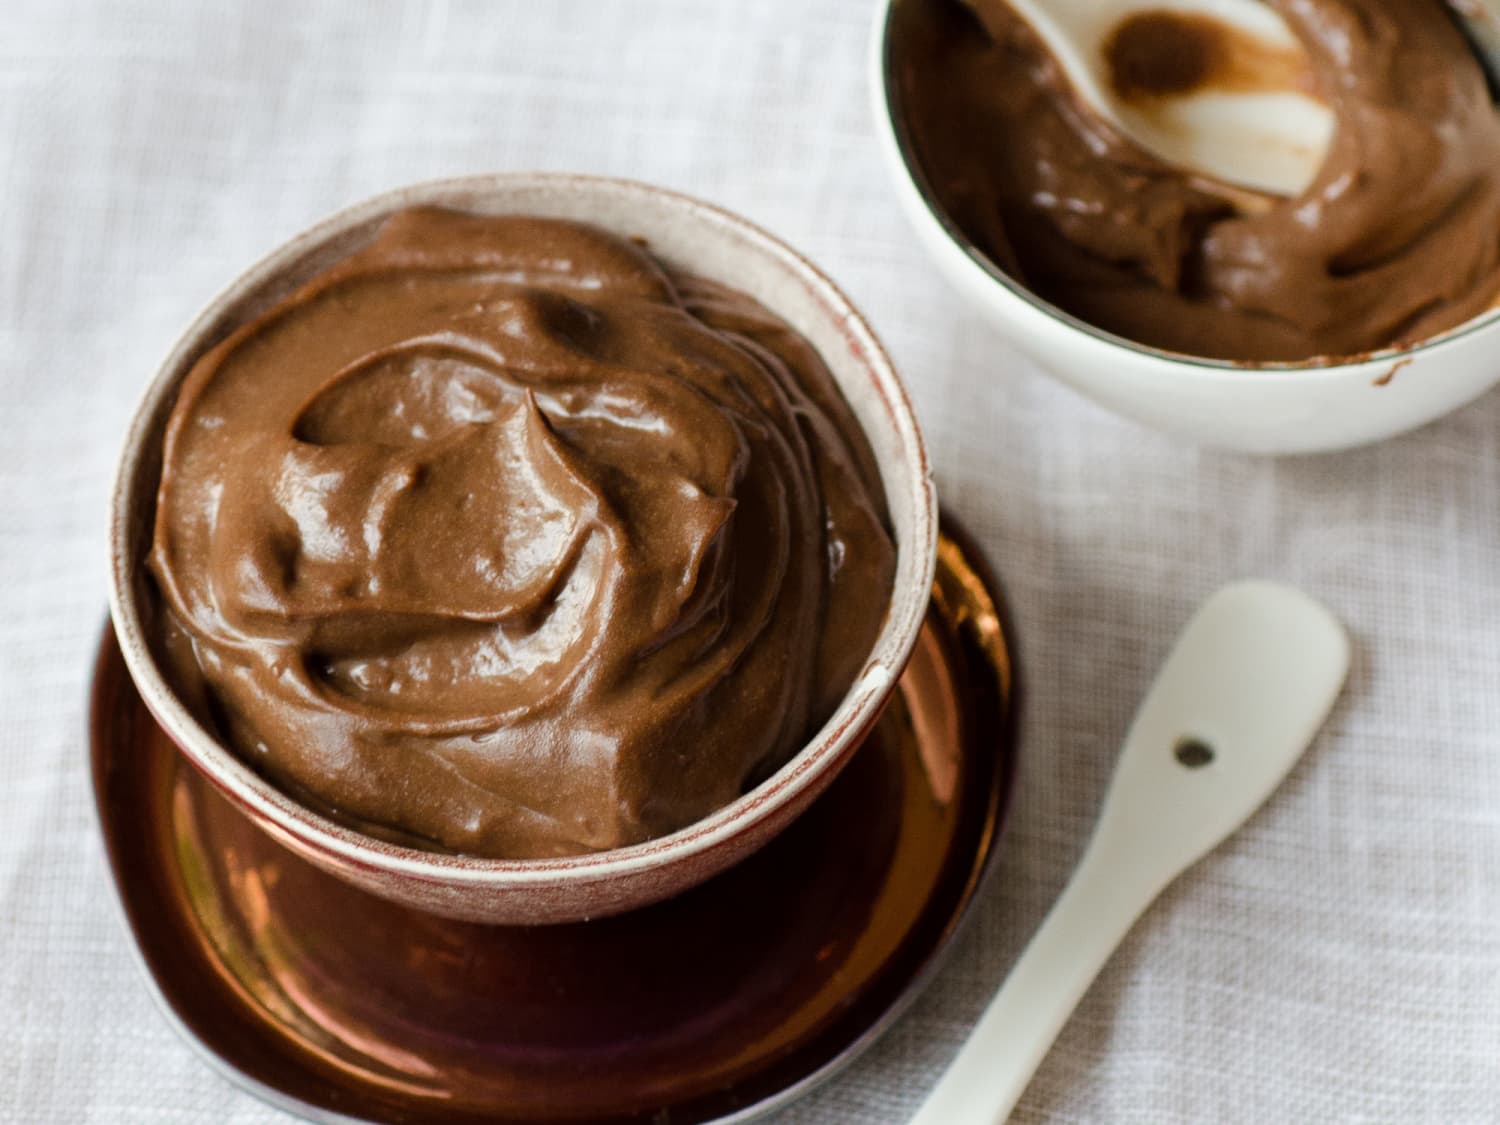 How To Make Chocolate Pudding from Scratch